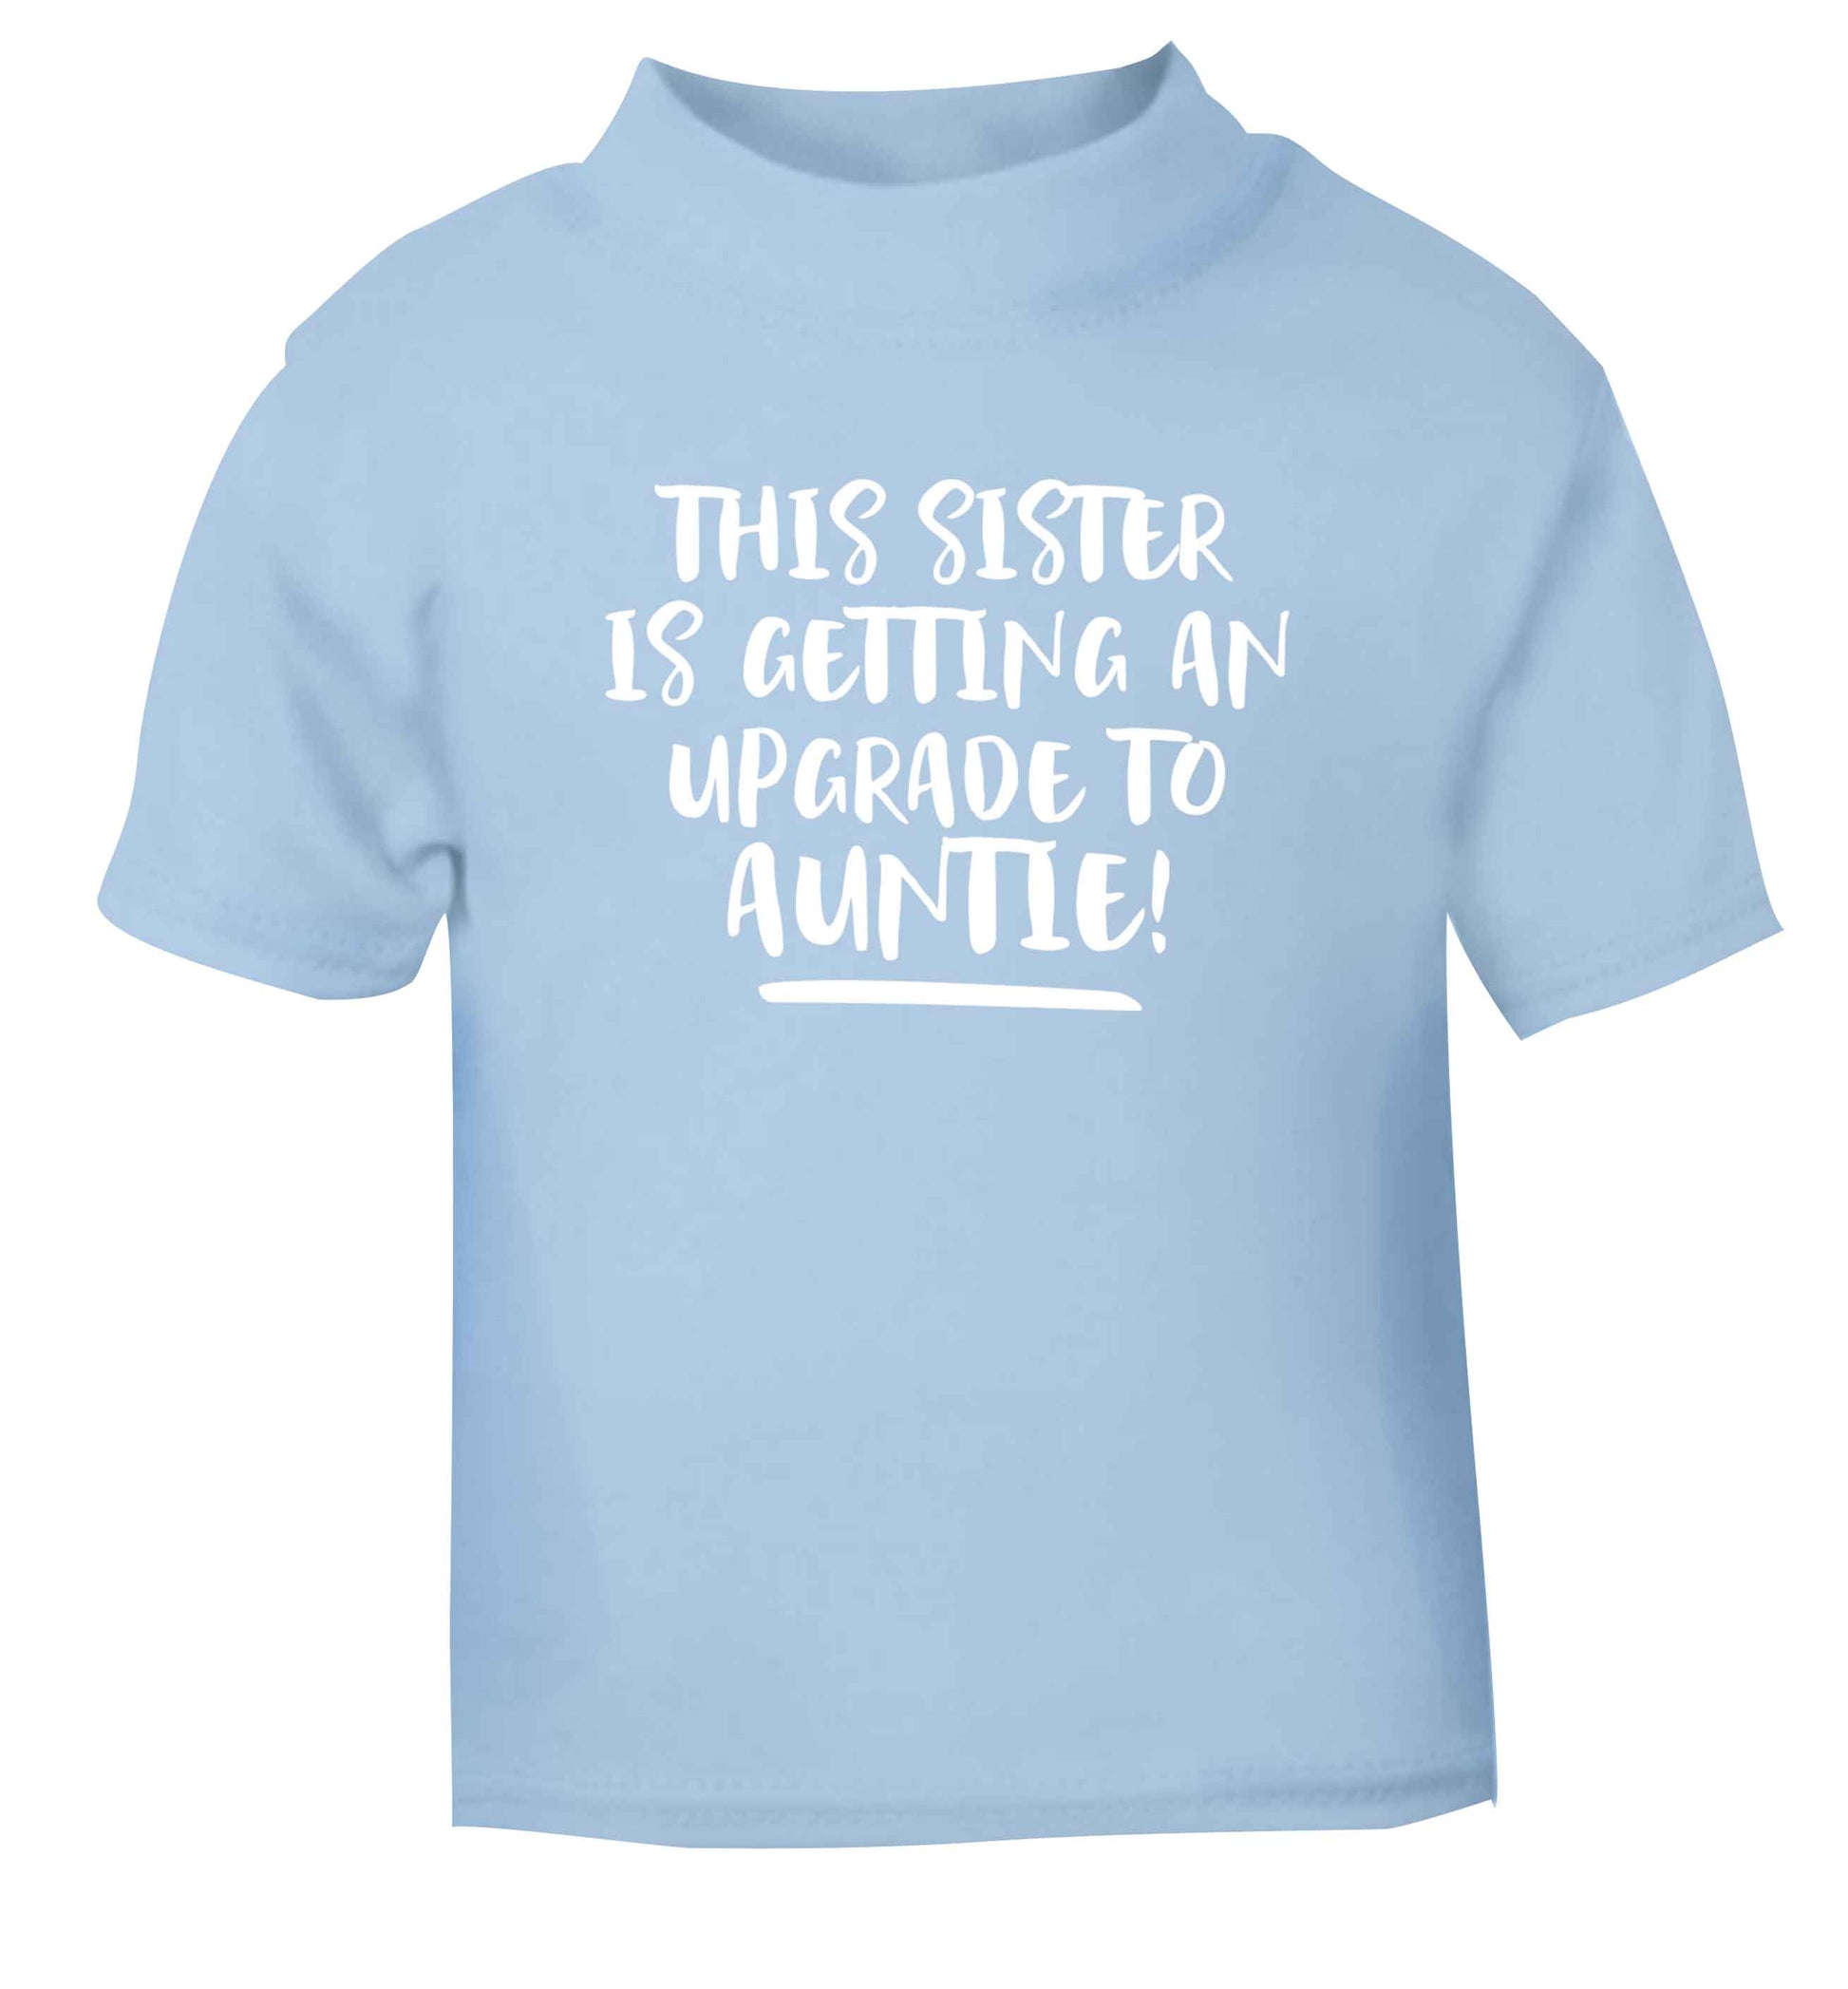 This sister is getting an upgrade to auntie! light blue Baby Toddler Tshirt 2 Years